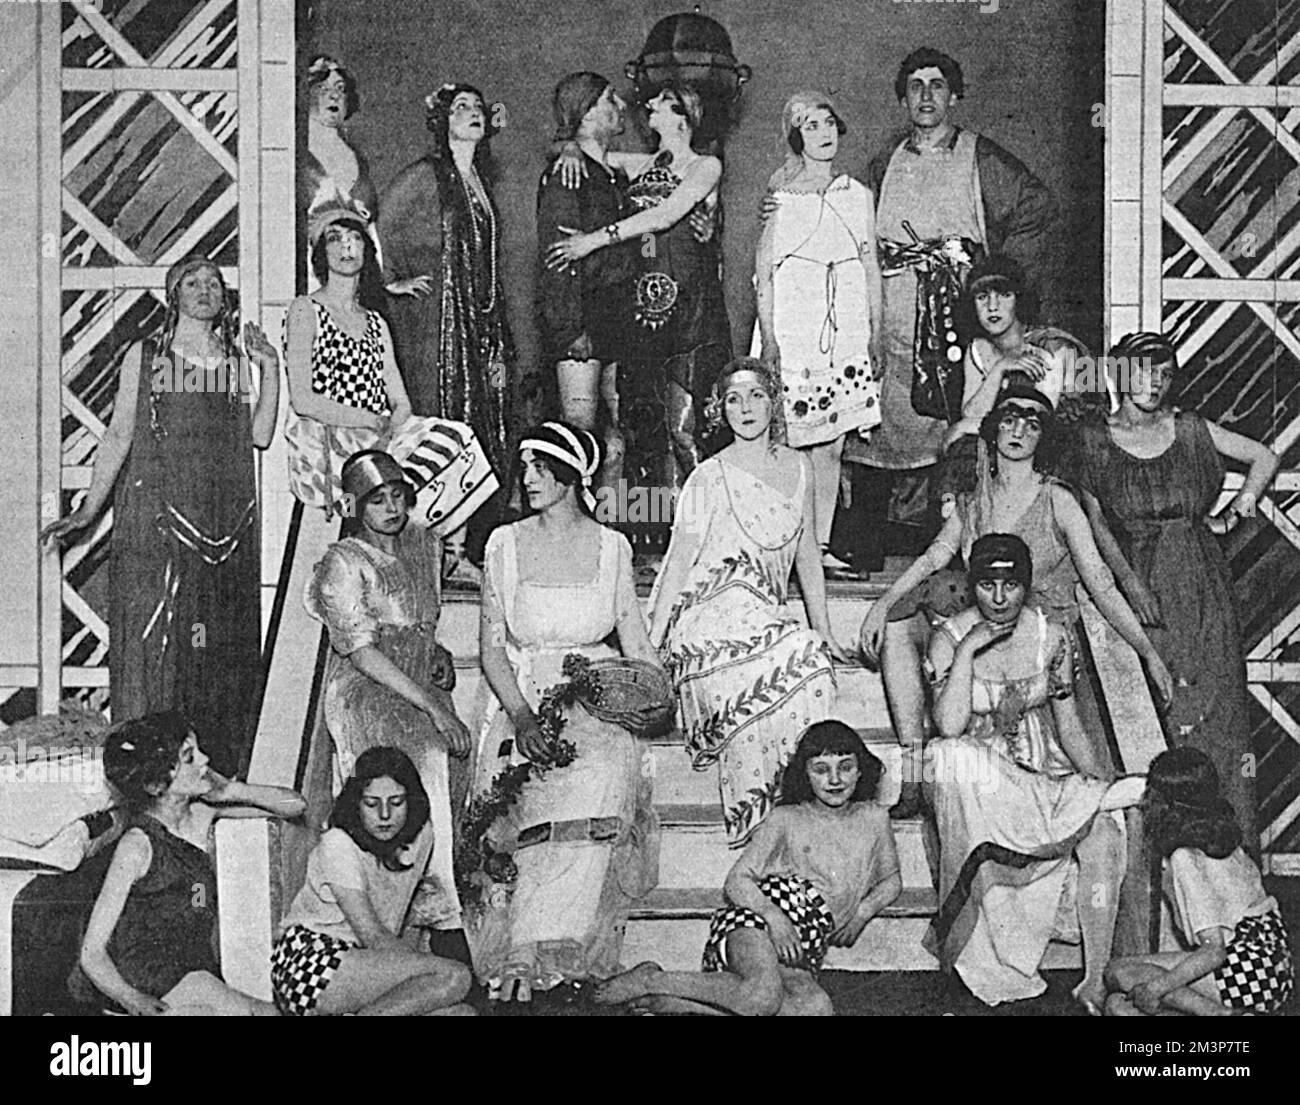 A group at Lena Ashwell's special matinee at the Lyric Theatre on 29 June 1917, in aid of the Concerts at the Front Fund.  A number of society ladies took part and the scene depicted shows the Swinburne Ballet which was a special feature of the entertainment.  In the centre is Lady Diana Manners, later Lady Duff Cooper.  Numerous matinee performances such as this were organised and acted out by society ladies during the First World War.       Date: 1917 Stock Photo